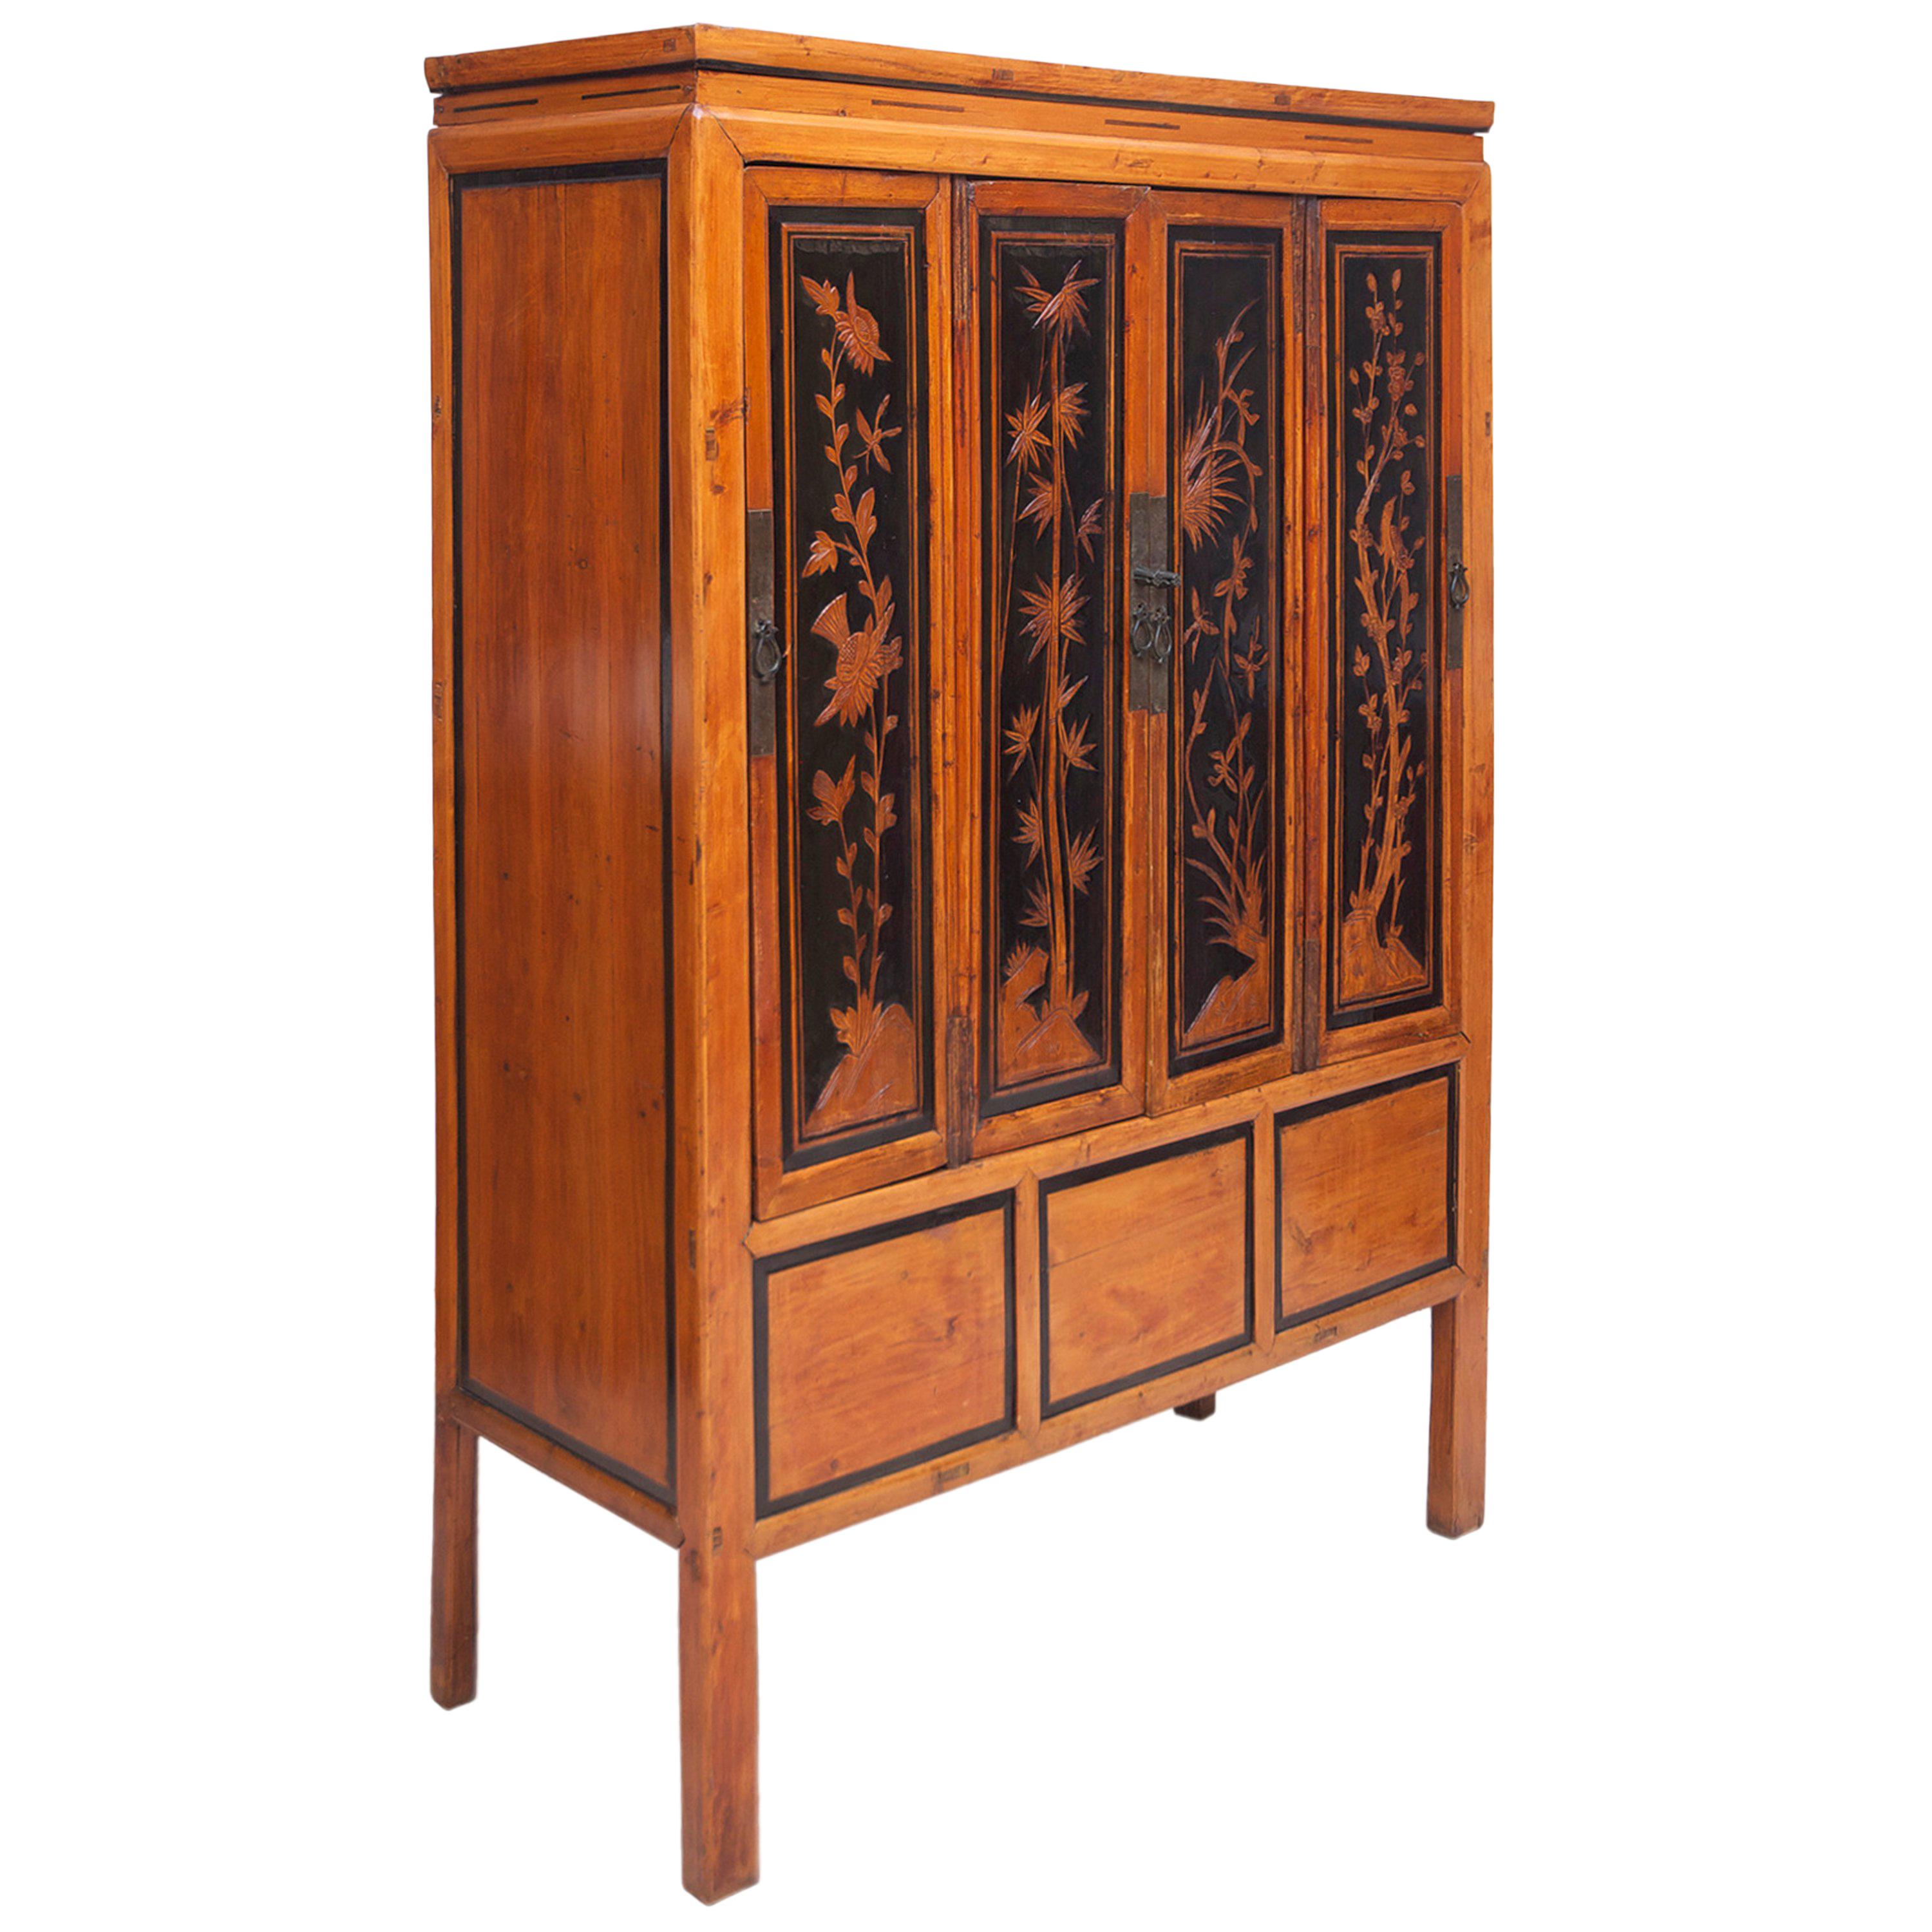 Antique Chinese Cabinet in Elm with Carved Scenes of Four Seasons & Ebonizing